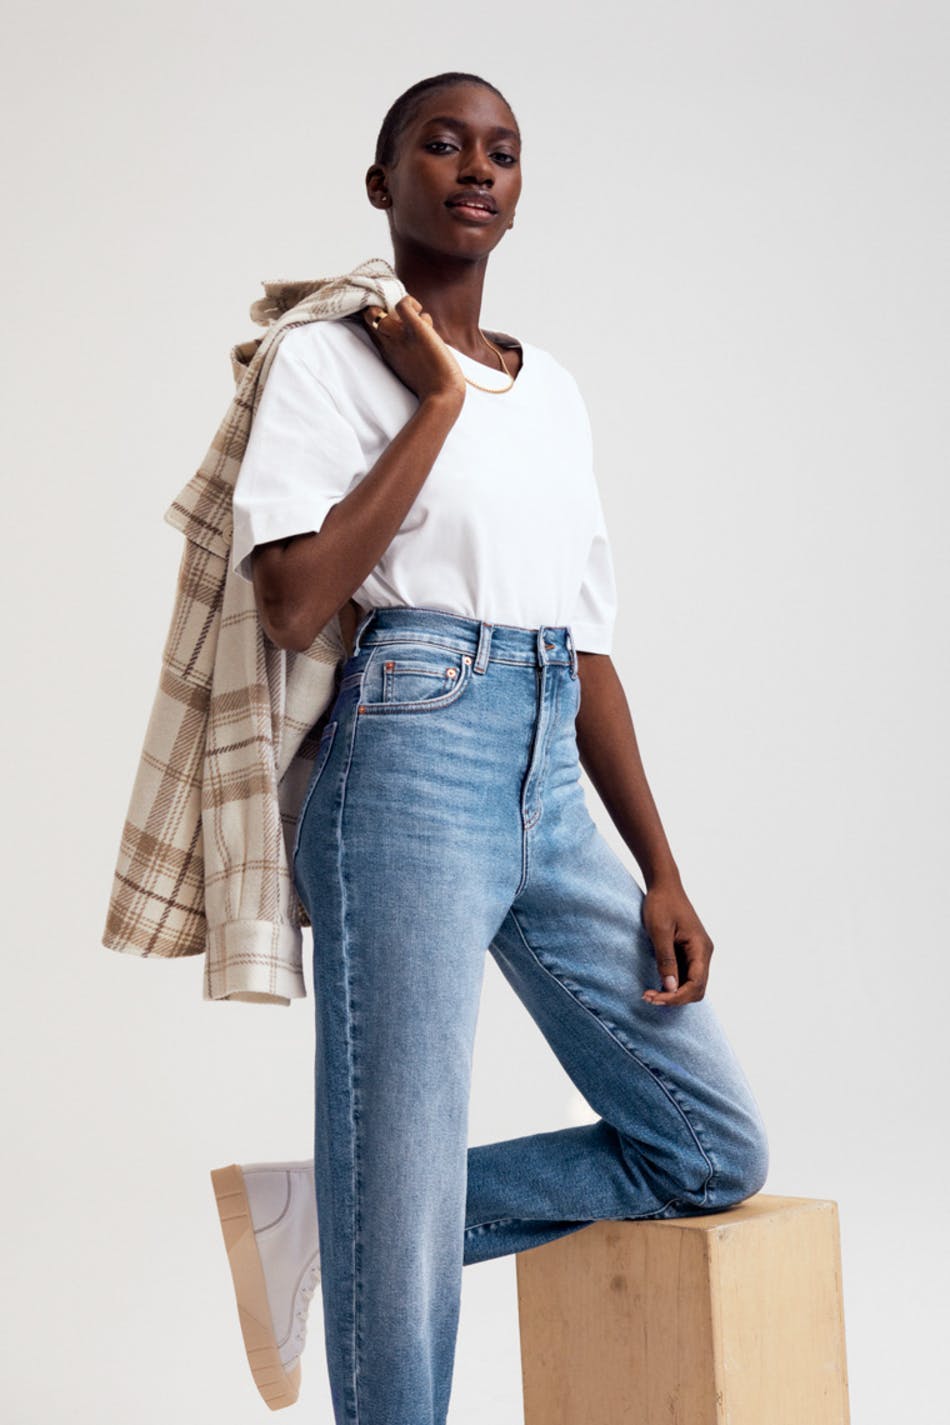 Comfy tall mom jeans, Gina Tricot